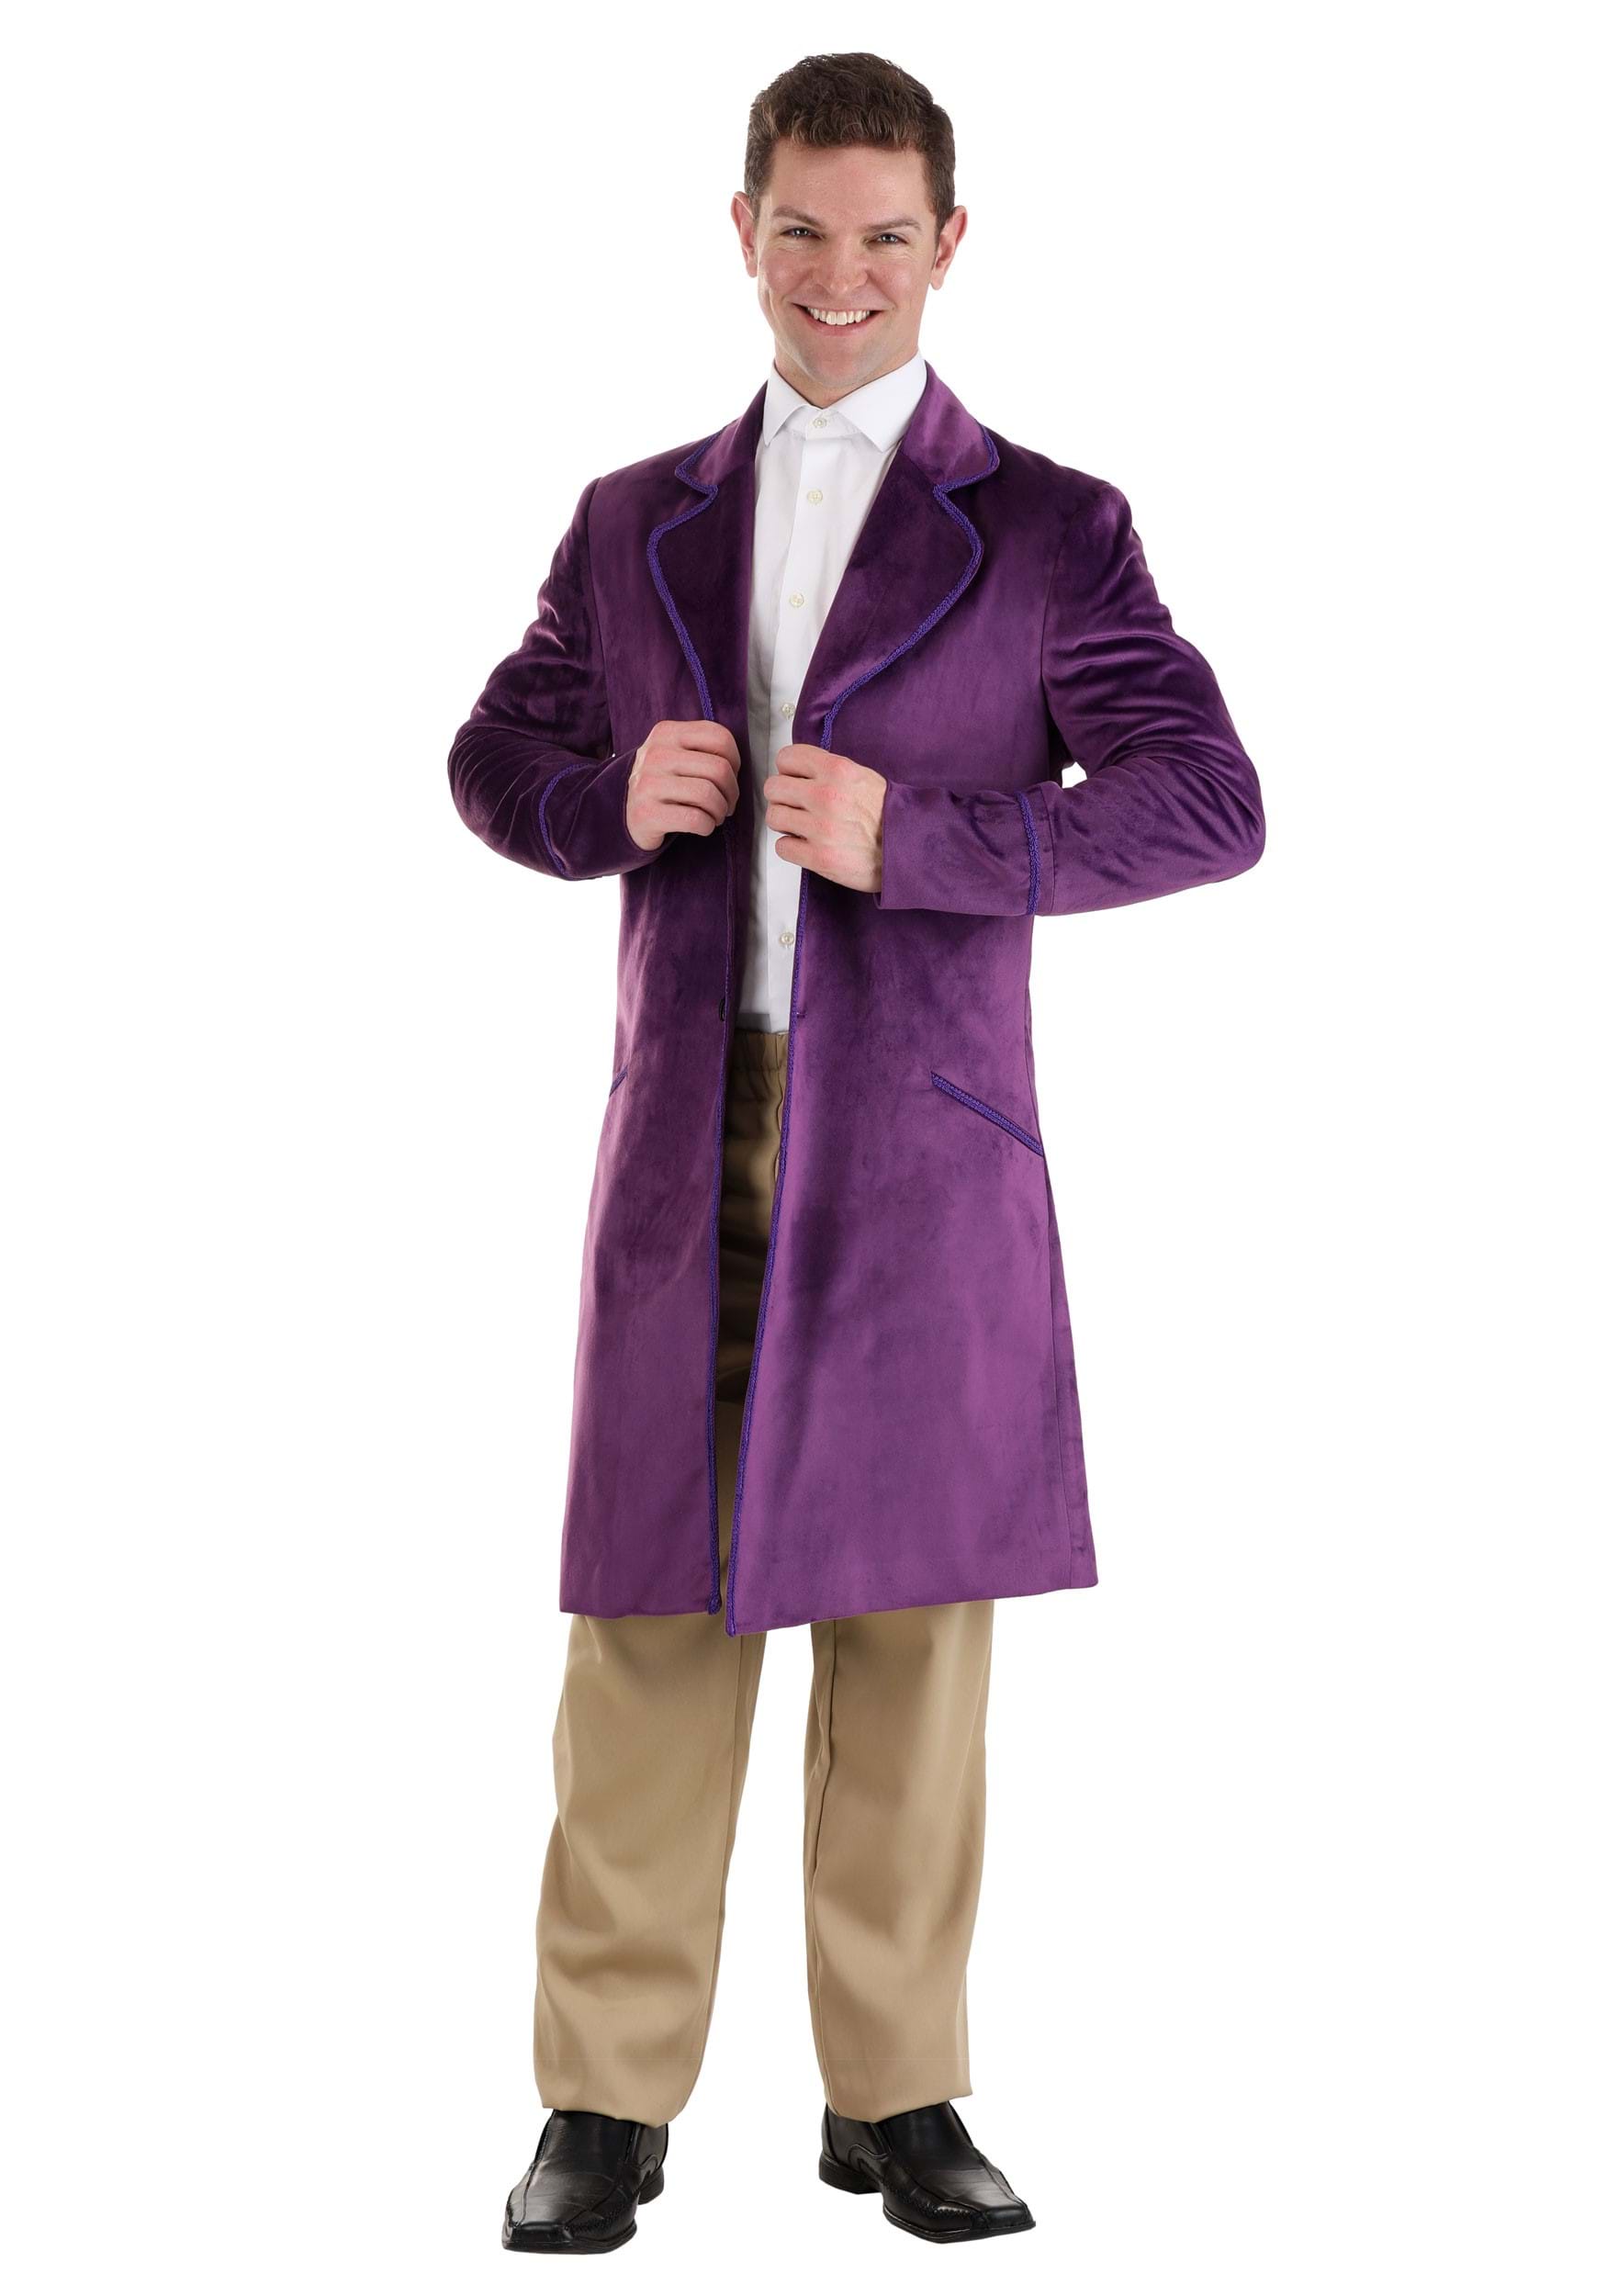 Image of Authentic Willy Wonka Costume Jacket for Men | Willy Wonka Costumes ID FUN1986AD-38